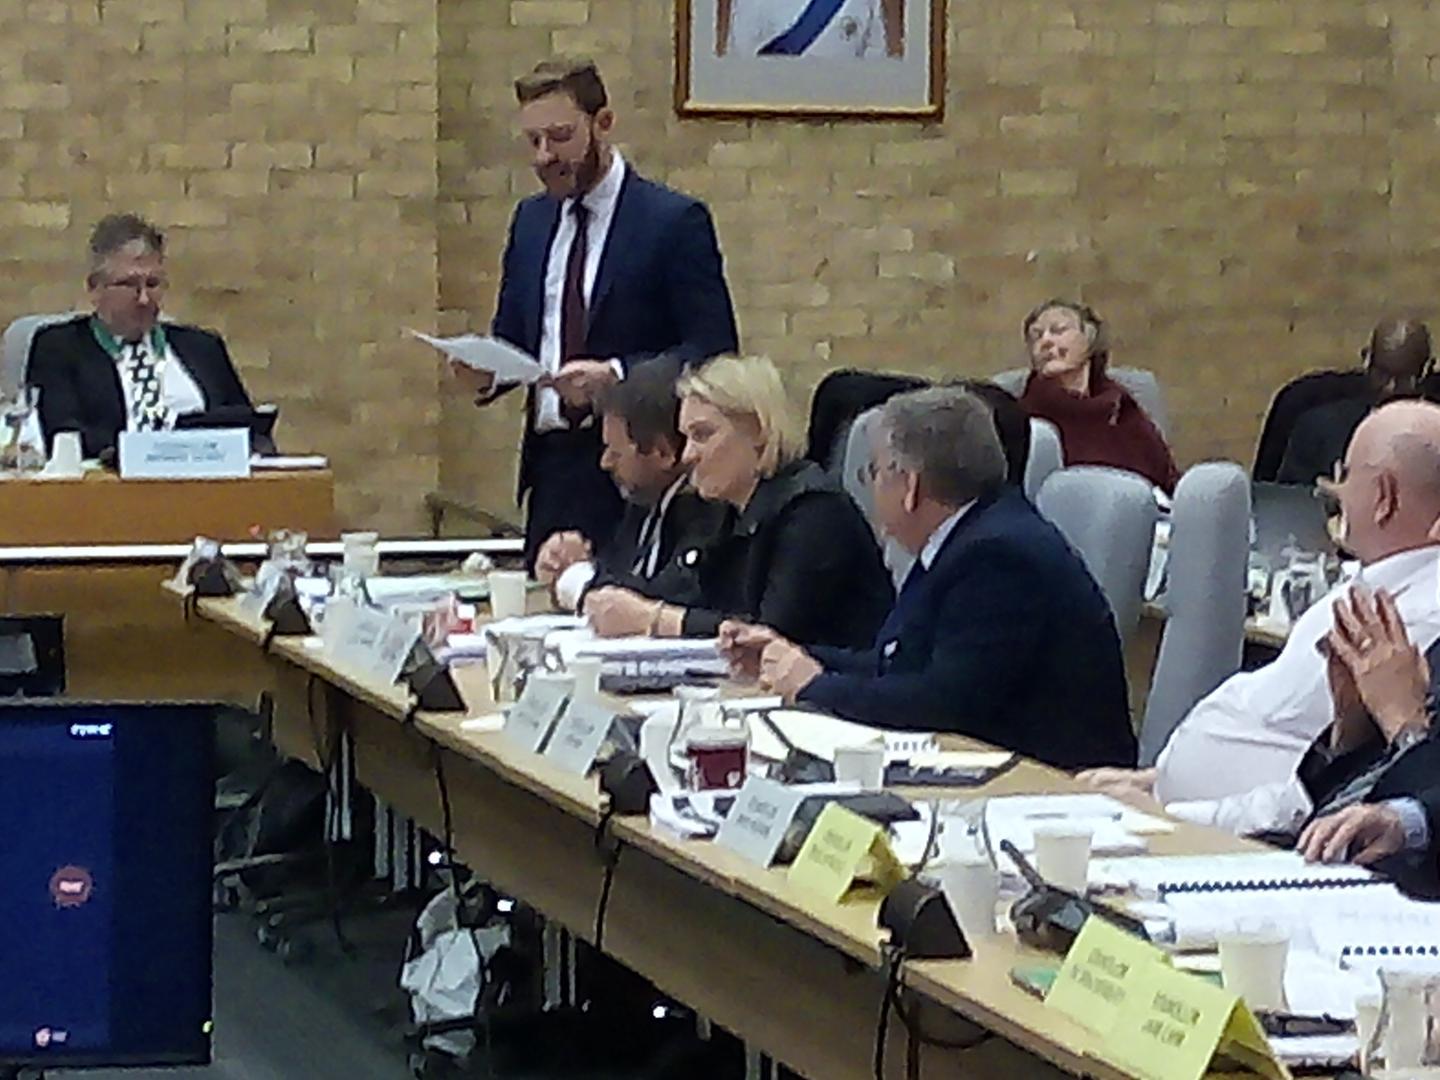 Cllr Walker, who represents the city's Stantonbury ward, proposed a range of amendments. Some, like a new 80,000 pedestrian crossing in Queensway, Bletchley, were accepted. Most were not.